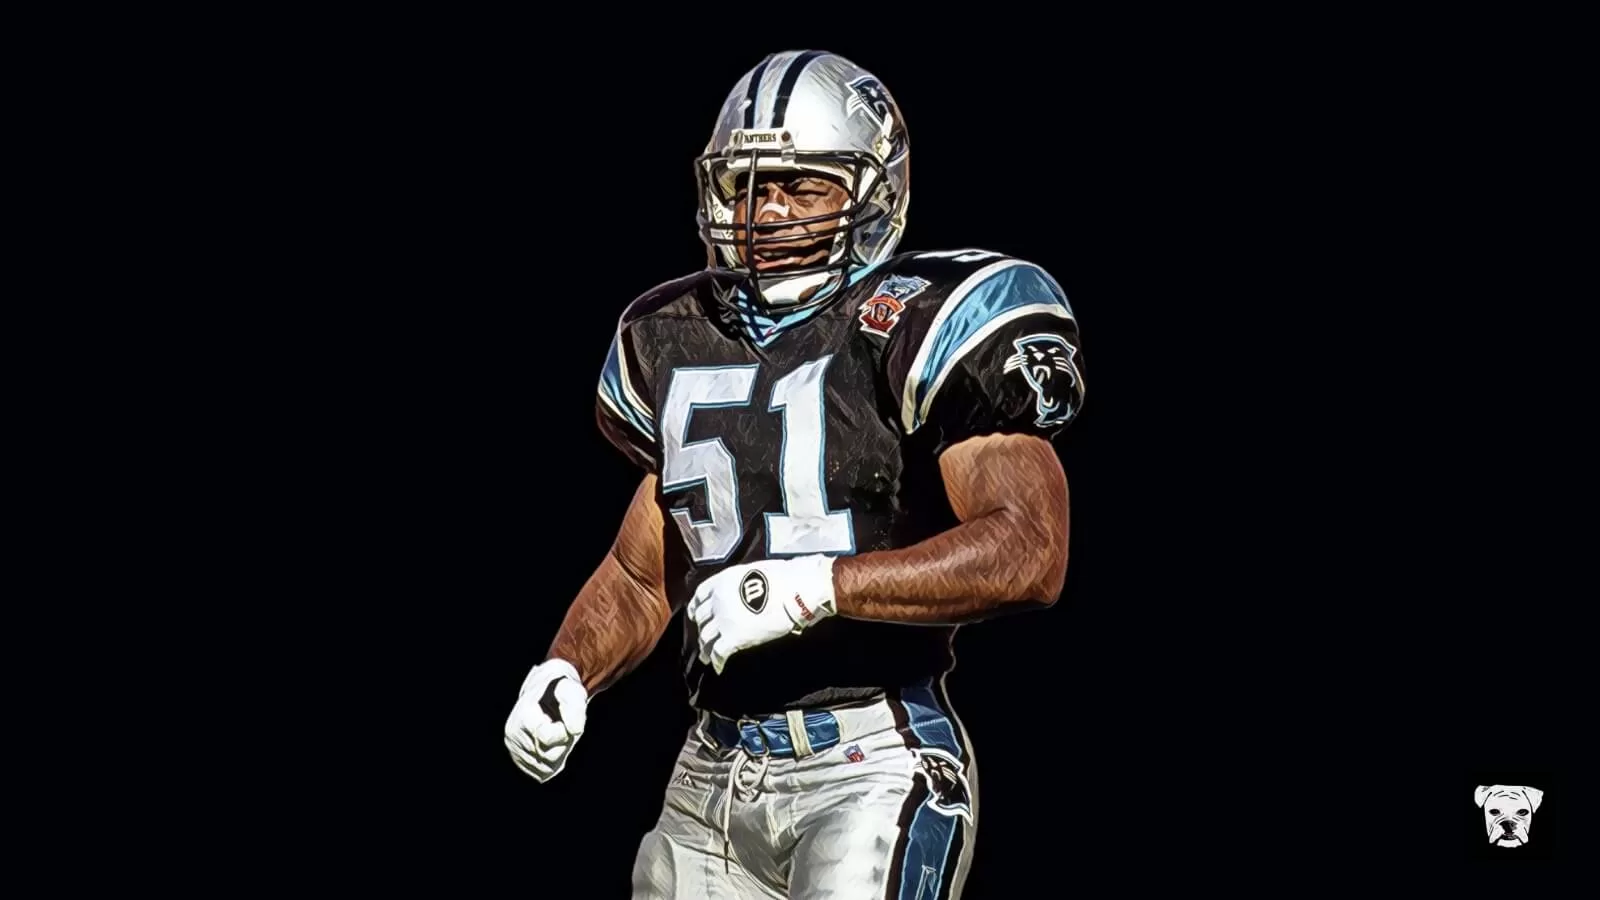 Sam Mills and more Division 3 football players who made it to the NFL